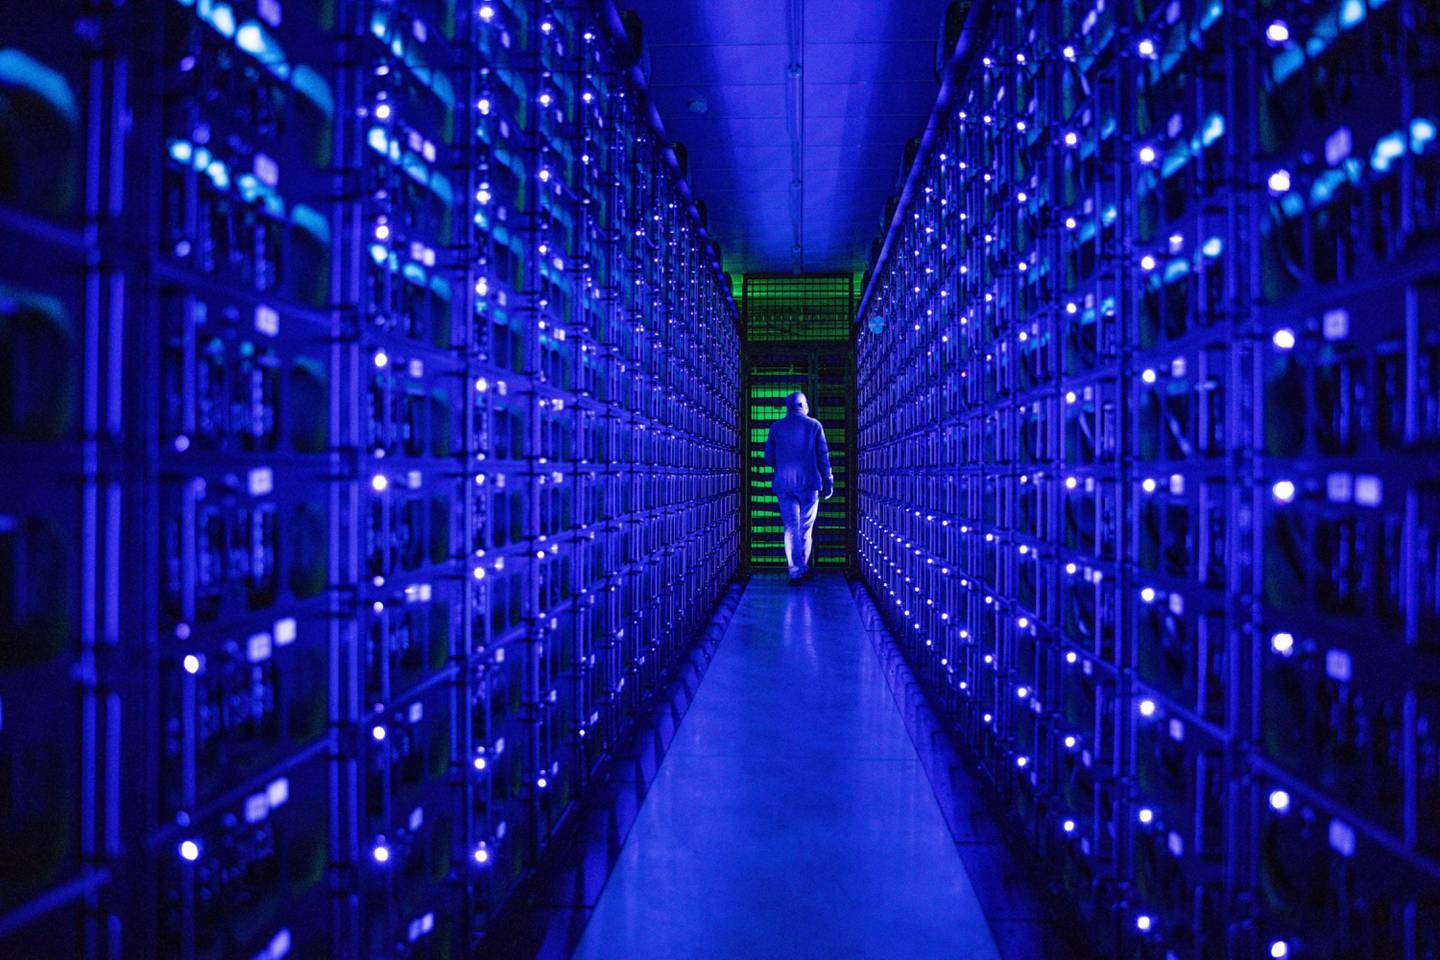 Data centers generate 2.5% of all the CO2 produced by humans, a larger carbon footprint than the aviation industry, which produces 2.1%.